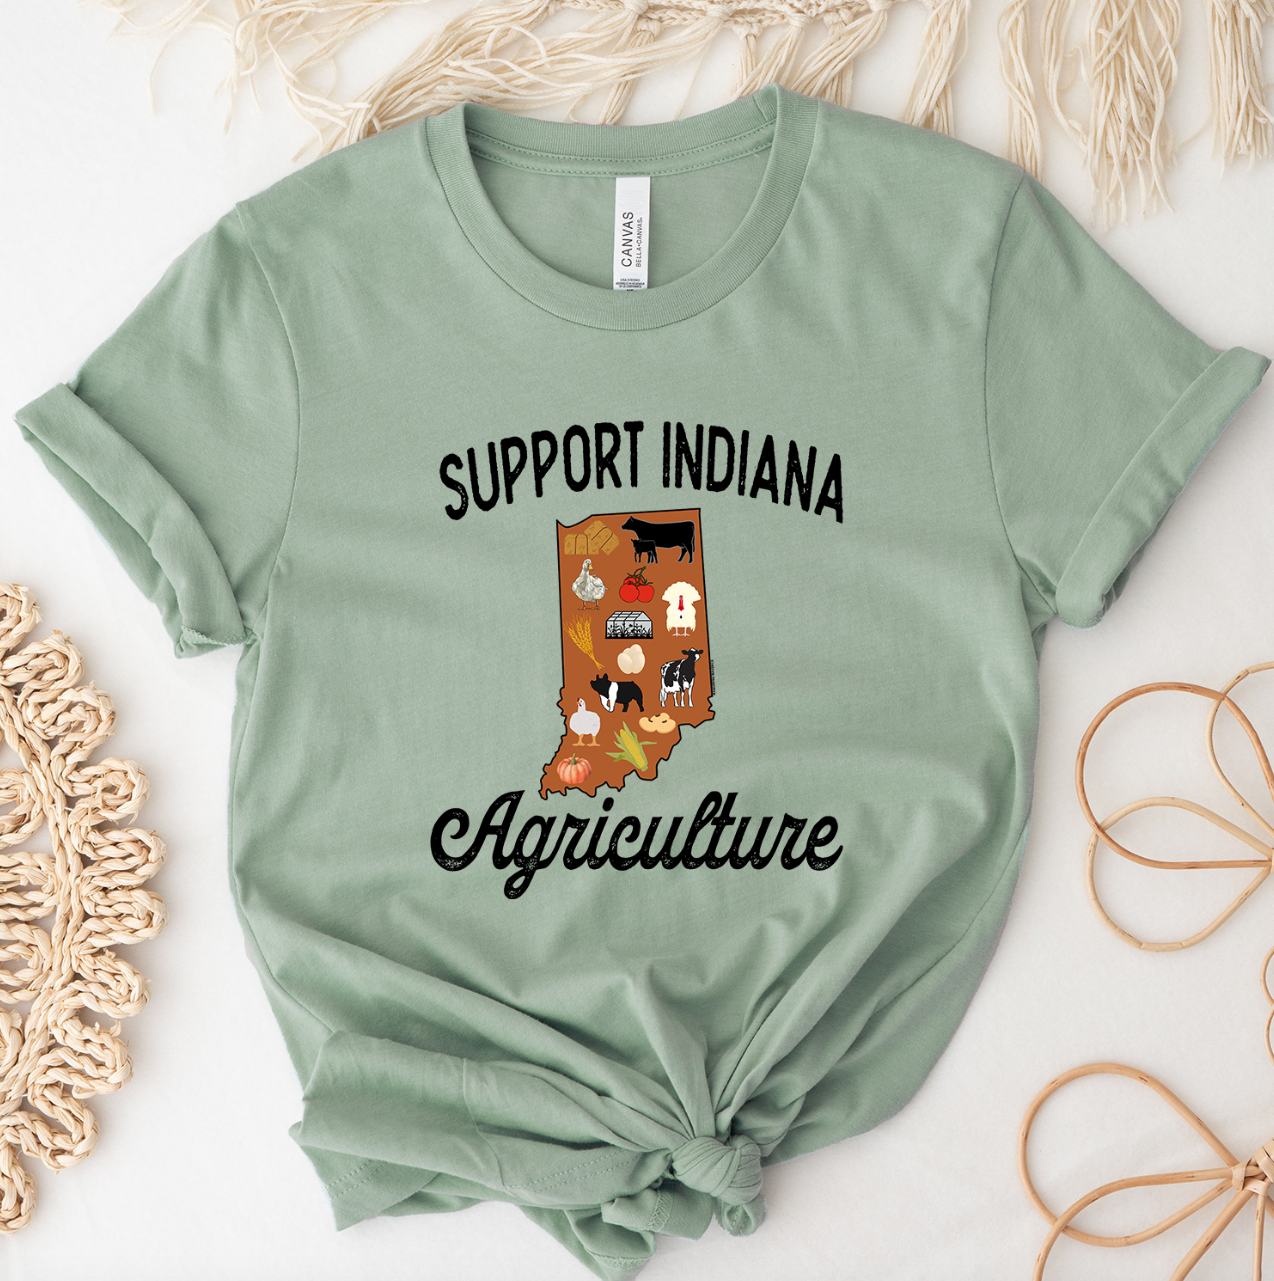 Support Indiana Agriculture T-Shirt (XS-4XL) - Multiple Colors!